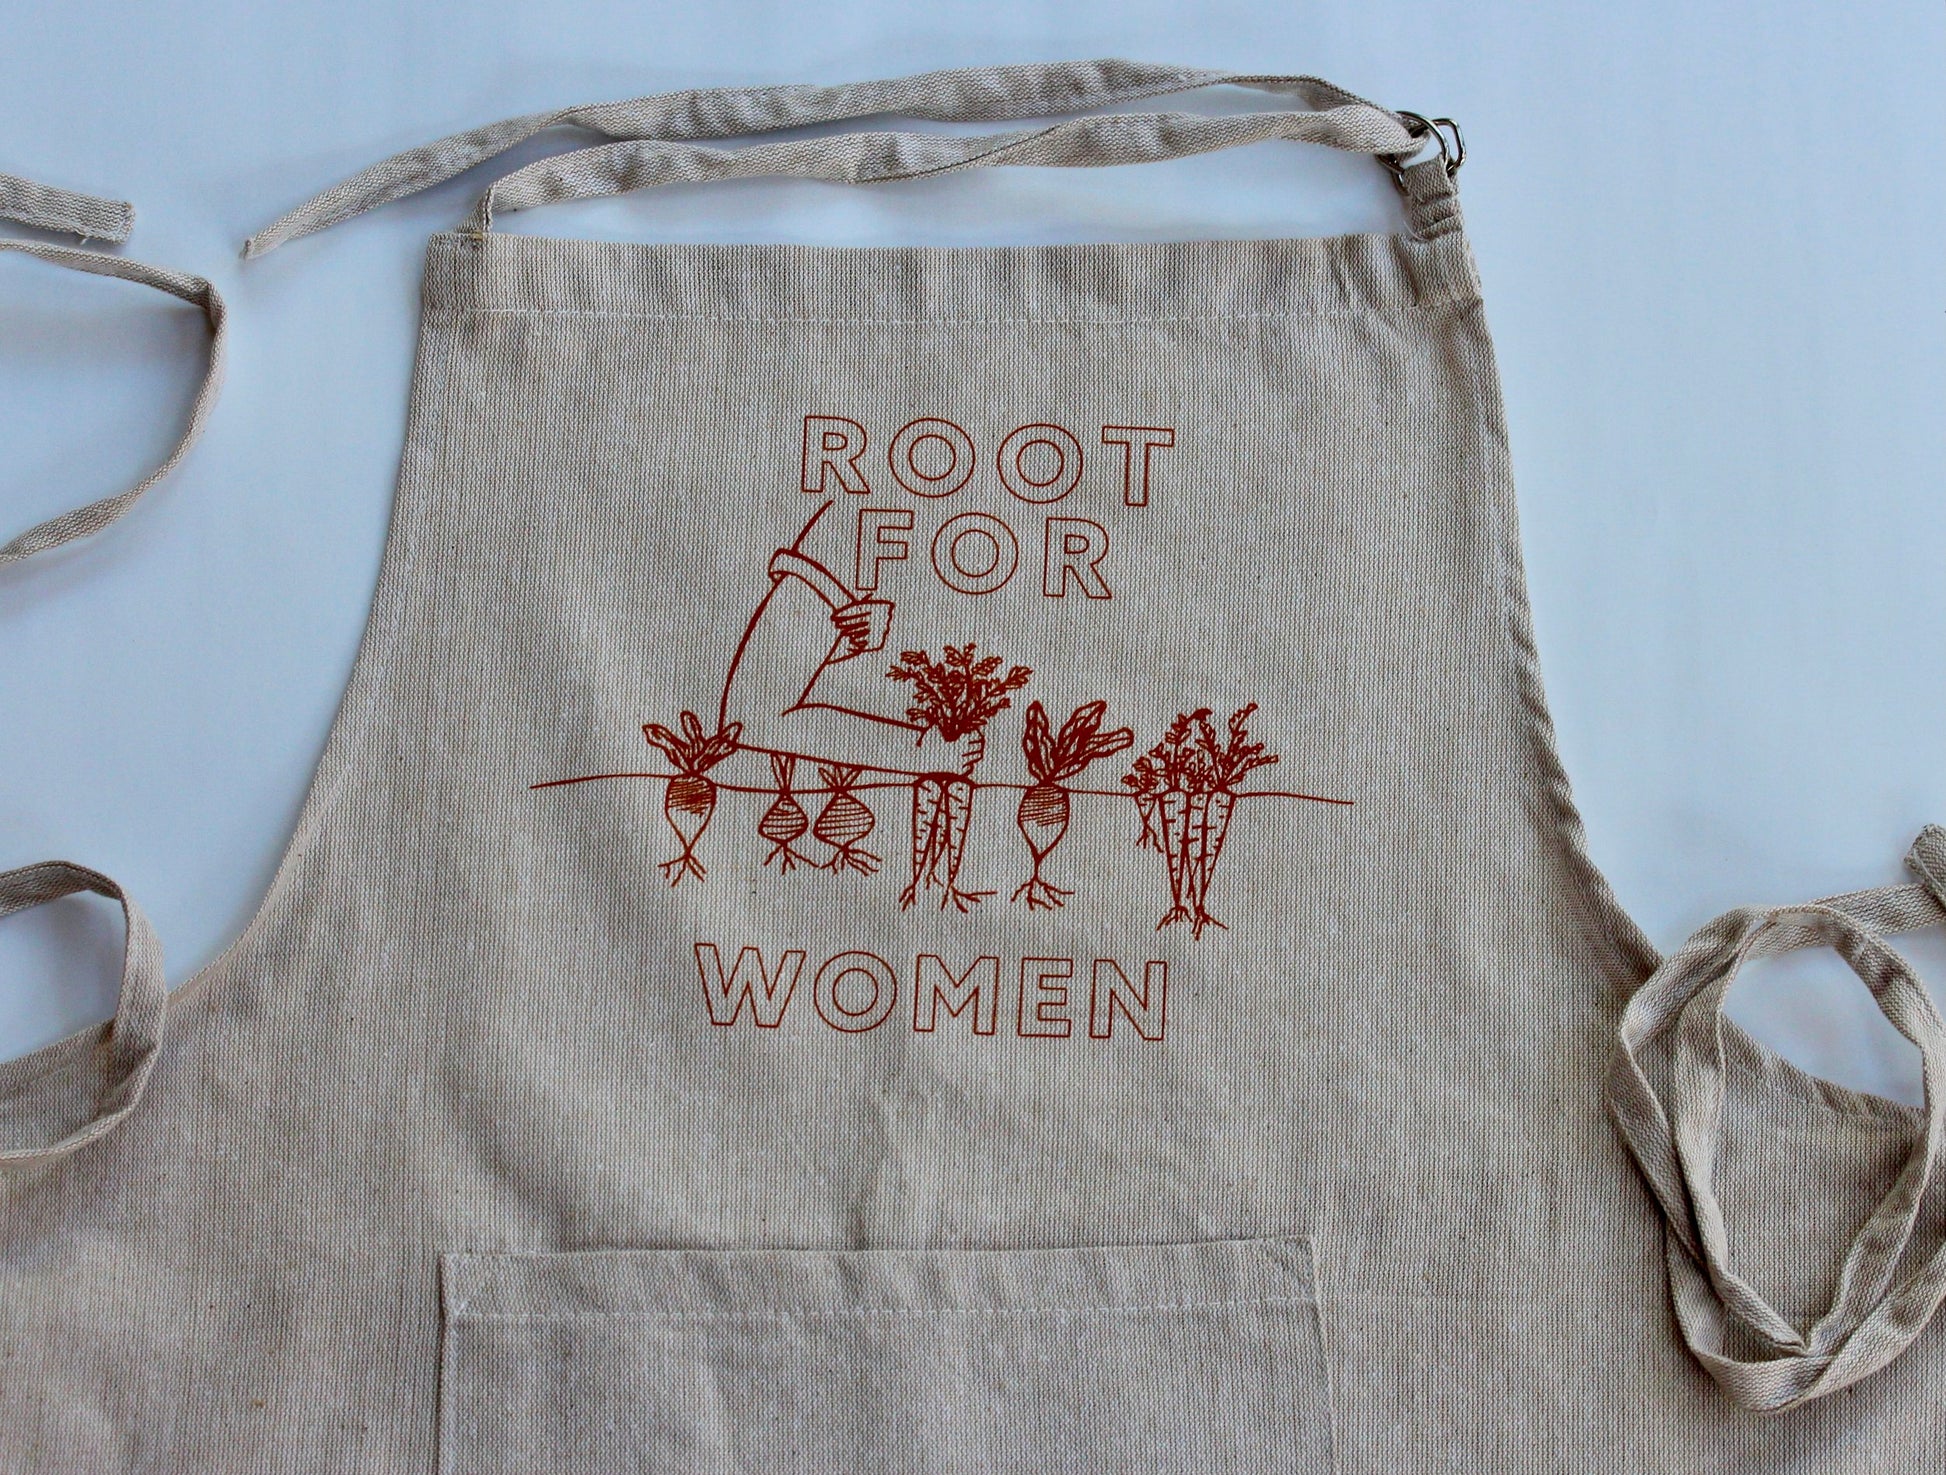 A close up of a natural color chambray apron reads "Root for Women" in carrot orange with a garden illustration